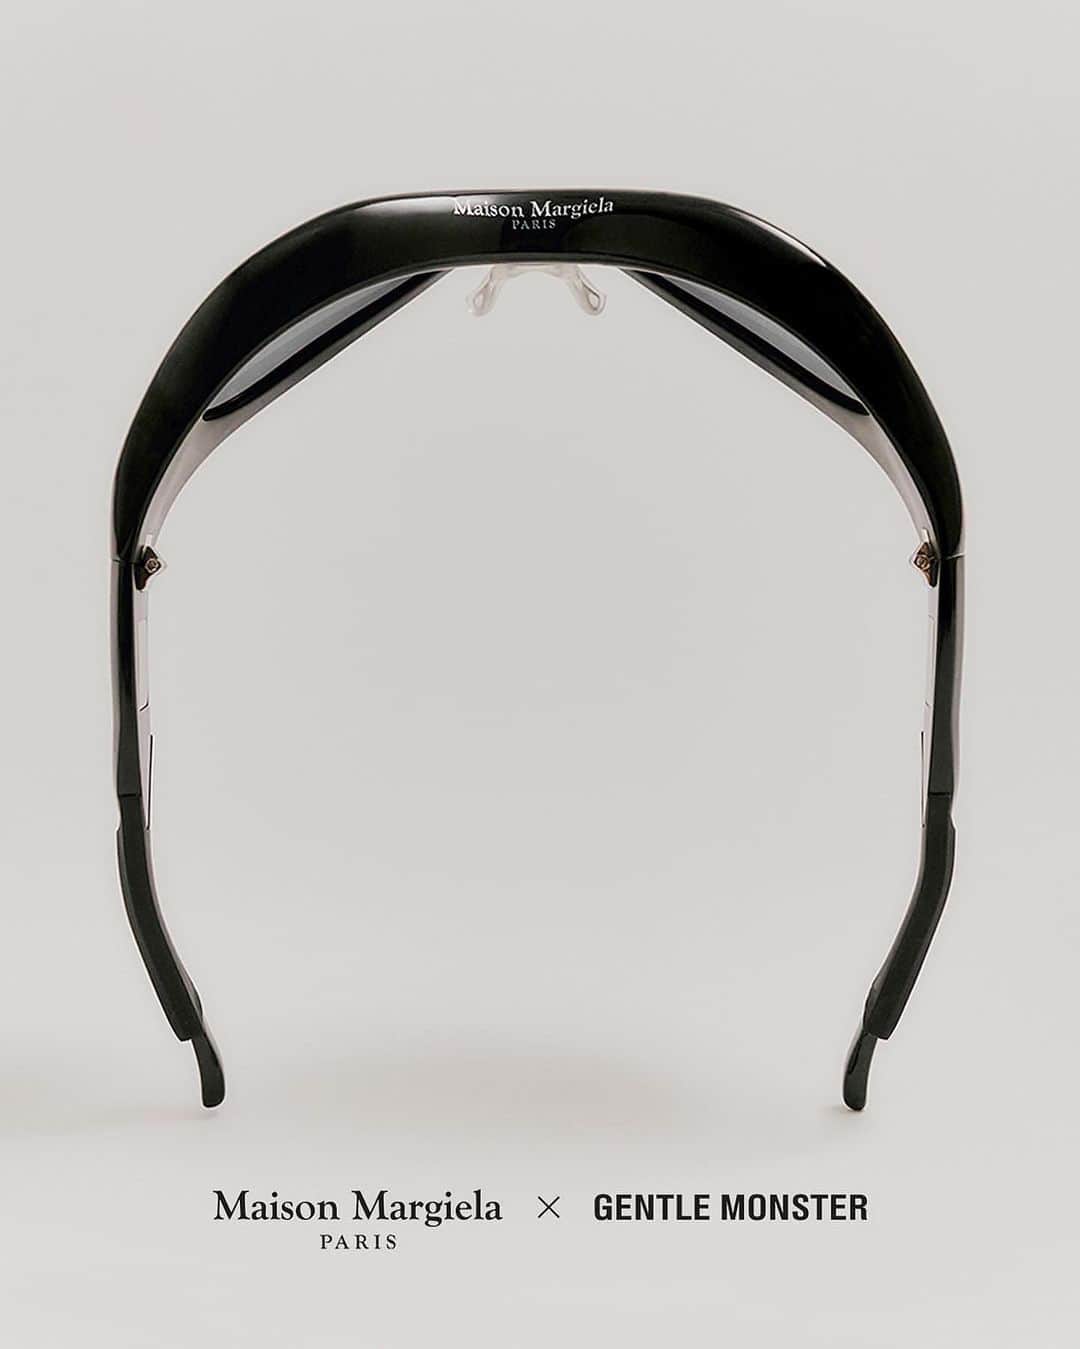 GENTLE MONSTERのインスタグラム：「Everything Everywhere.⁣ ⁣ Maison Margiela × Gentle Monster eyewear collection. Conceived by John Galliano and Gentle Monster, the genderless line includes sunglasses and spectacles.  Due to high demand, the sold out products will be restocked soon.⁣ ⁣ Maison Margiela × Gentle Monster 컬렉션은 John Galliano와 Gentle Monster가 함께 고안한 젠더리스 라인으로, 다양한 선글라스와 옵티컬을 선보입니다. ⁣  빠른 재고 품절로 인한 제품들은 추후 입고 예정입니다.⁣ ⁣ #MaisonMargielaxGentleMonster⁣ #GentleMonster」